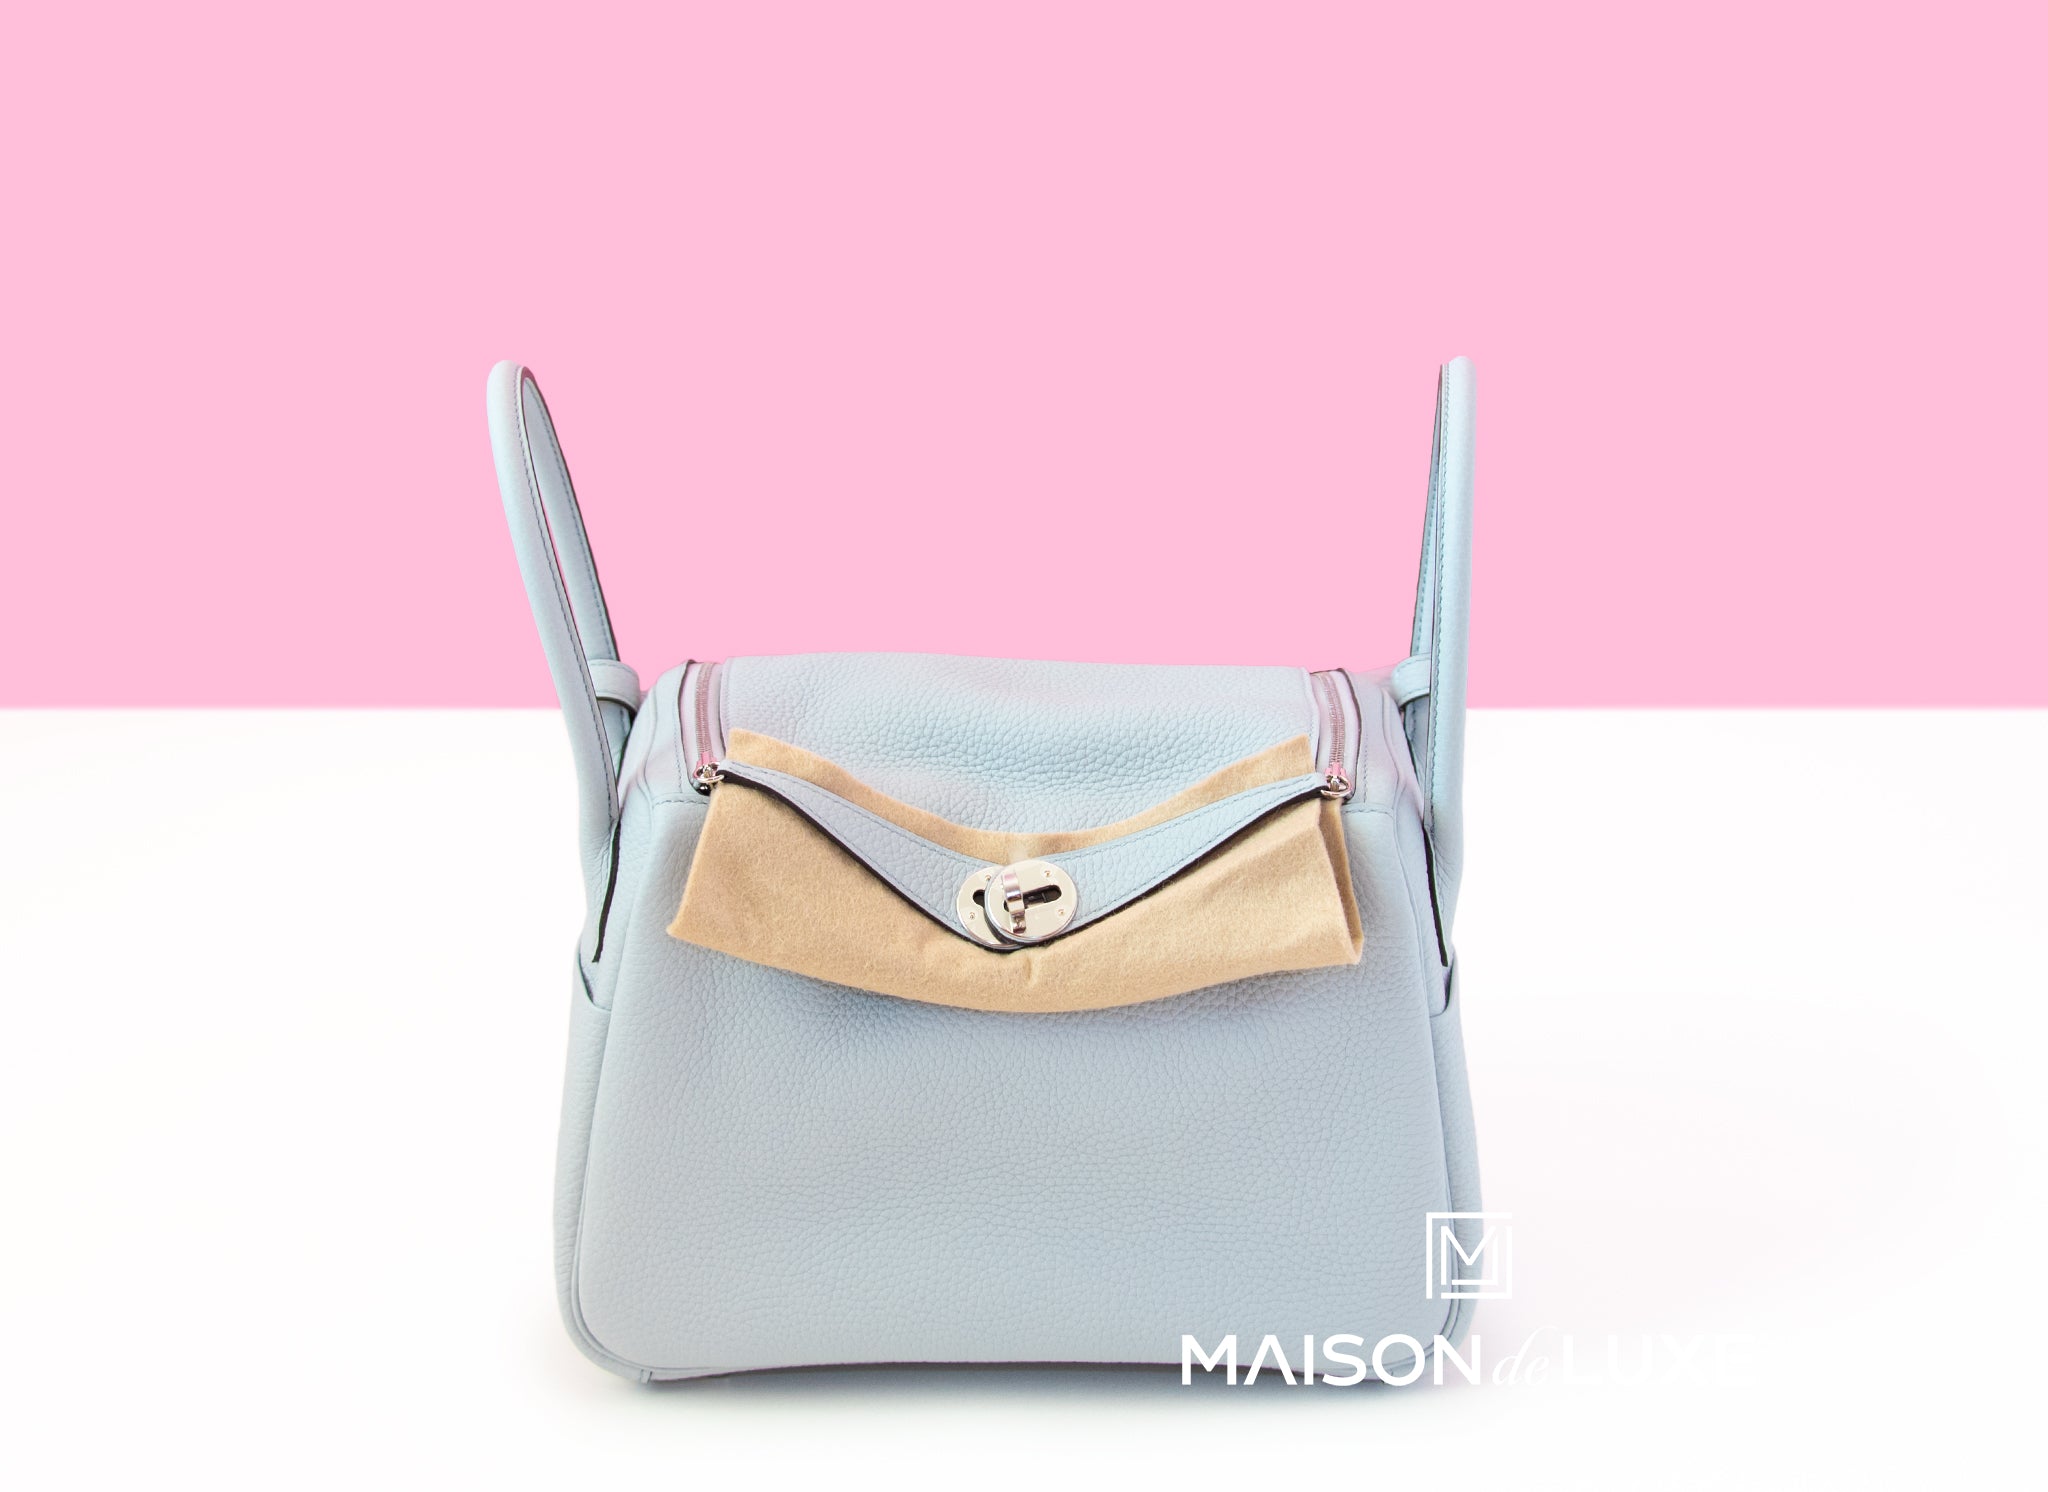 Hermes Mini Lindy In Bleu Pale Clemence Leather With Gold Hardware